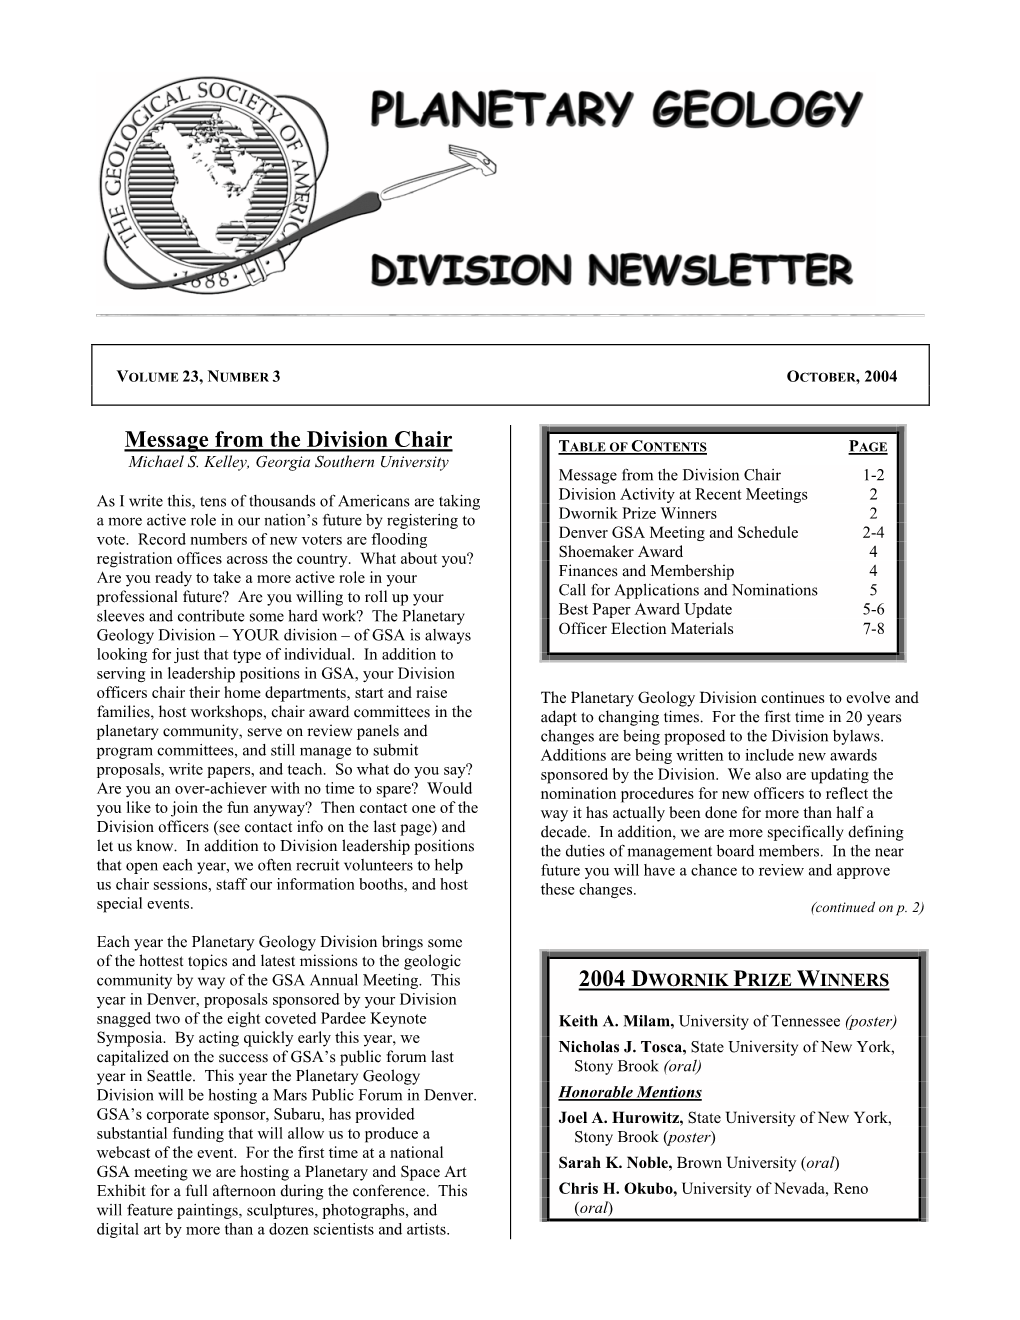 Message from the Division Chair TABLE of CONTENTS PAGE Michael S